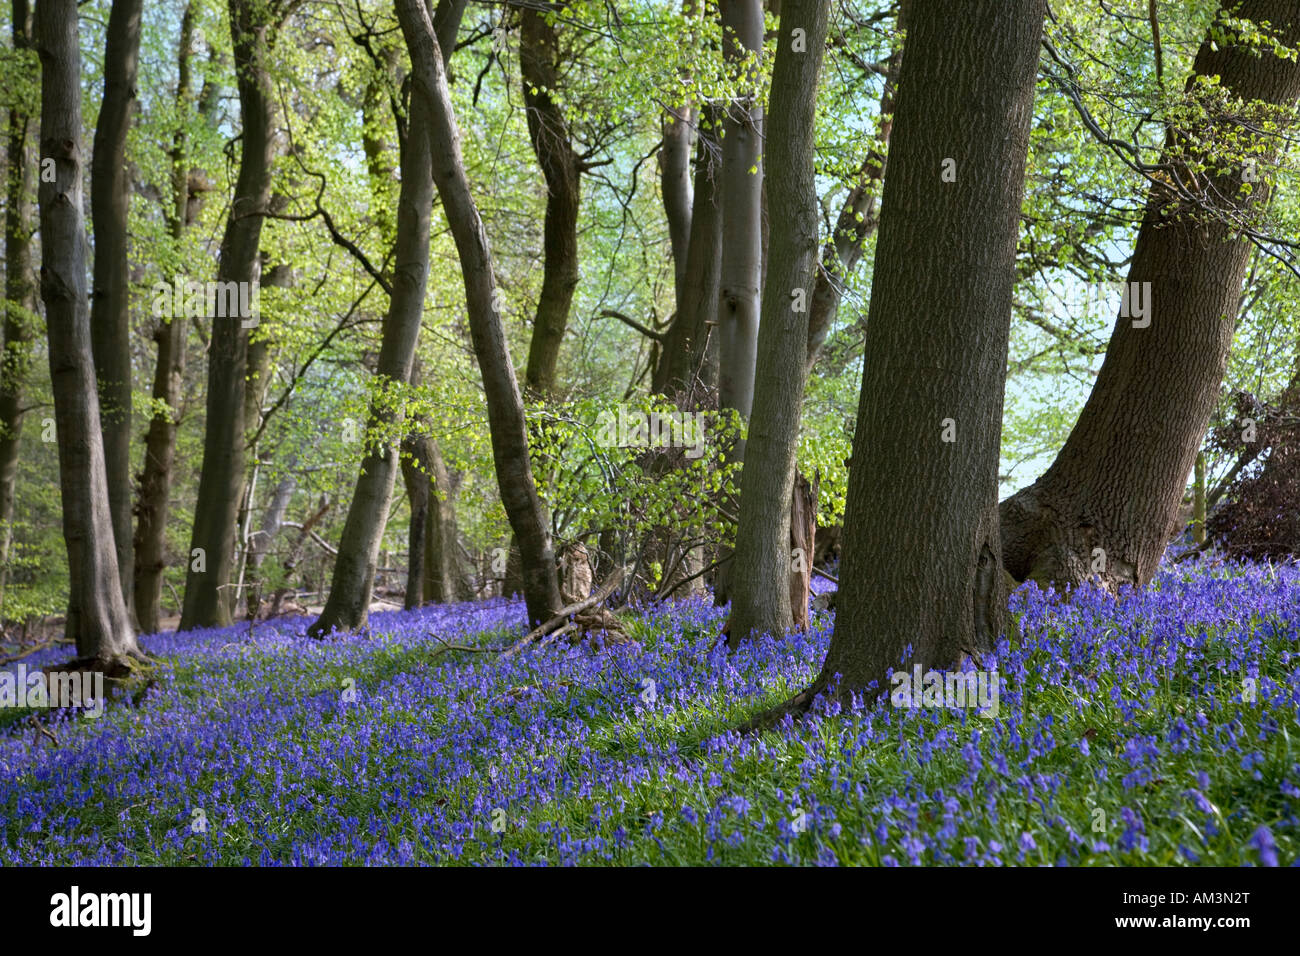 Bluebell wood in spring. Chiltern hills England. (Latin name: Endymion non-scriptus) Stock Photo